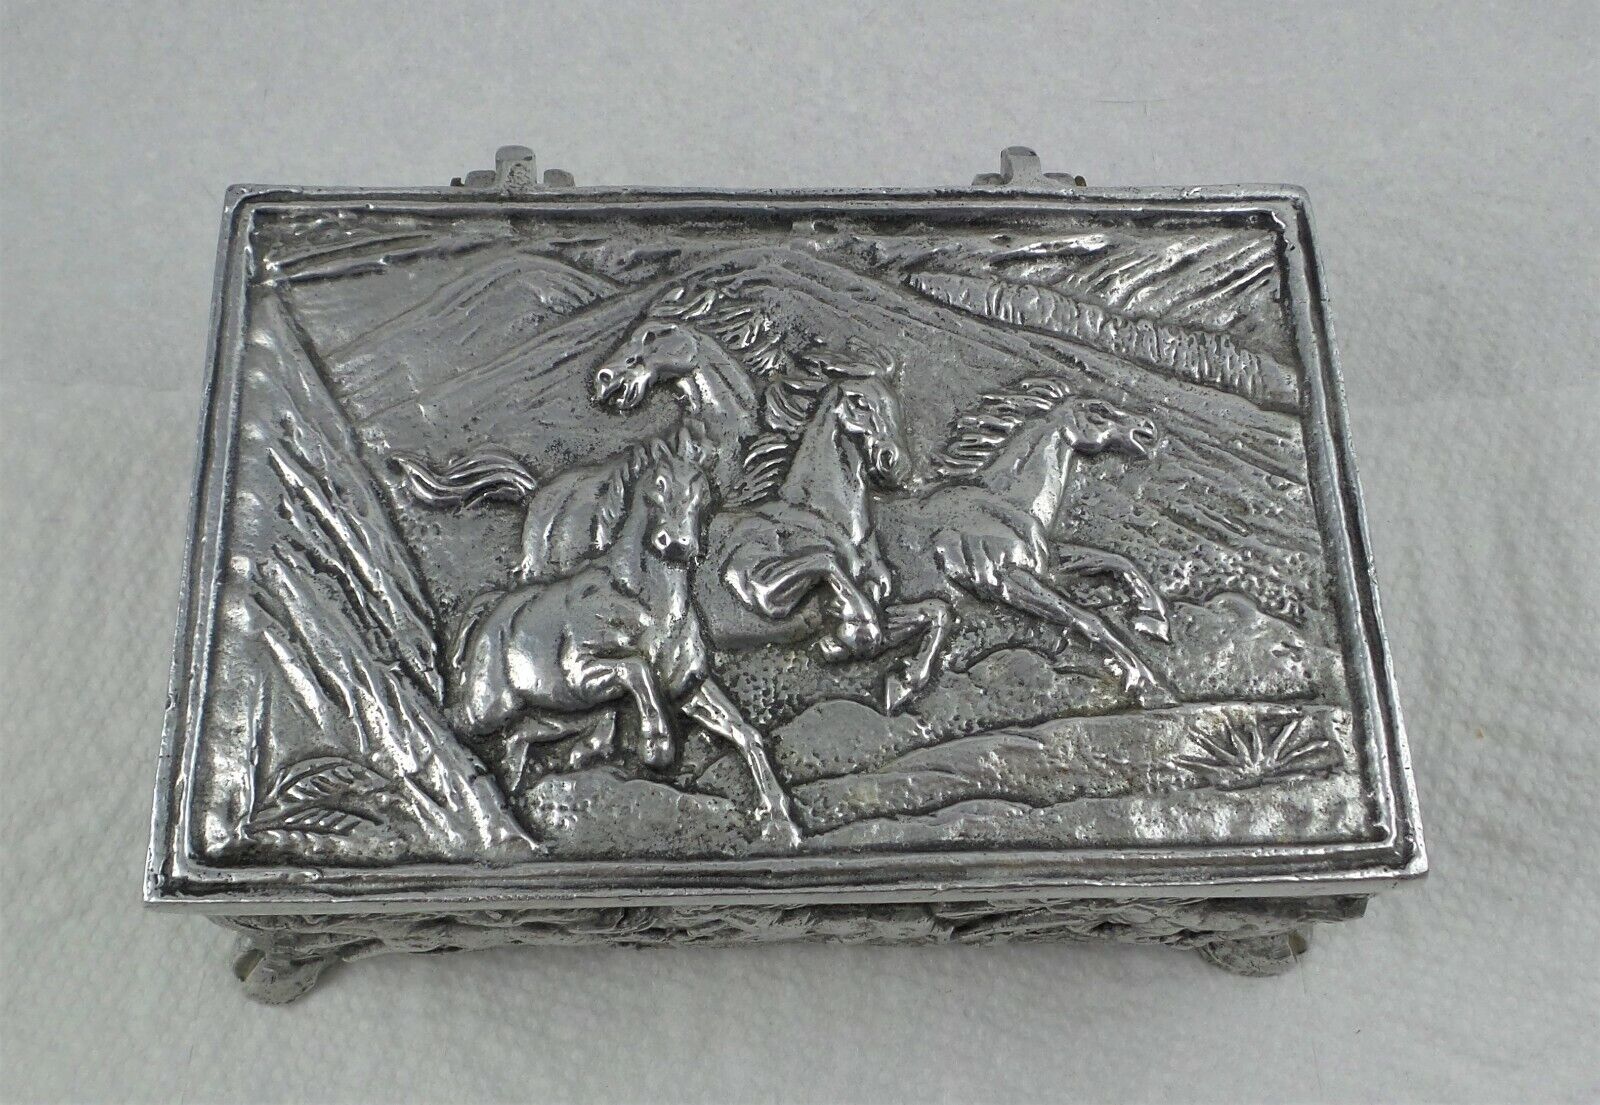 Vintage Arthur Court Hinged Metal Box With Horses 1990